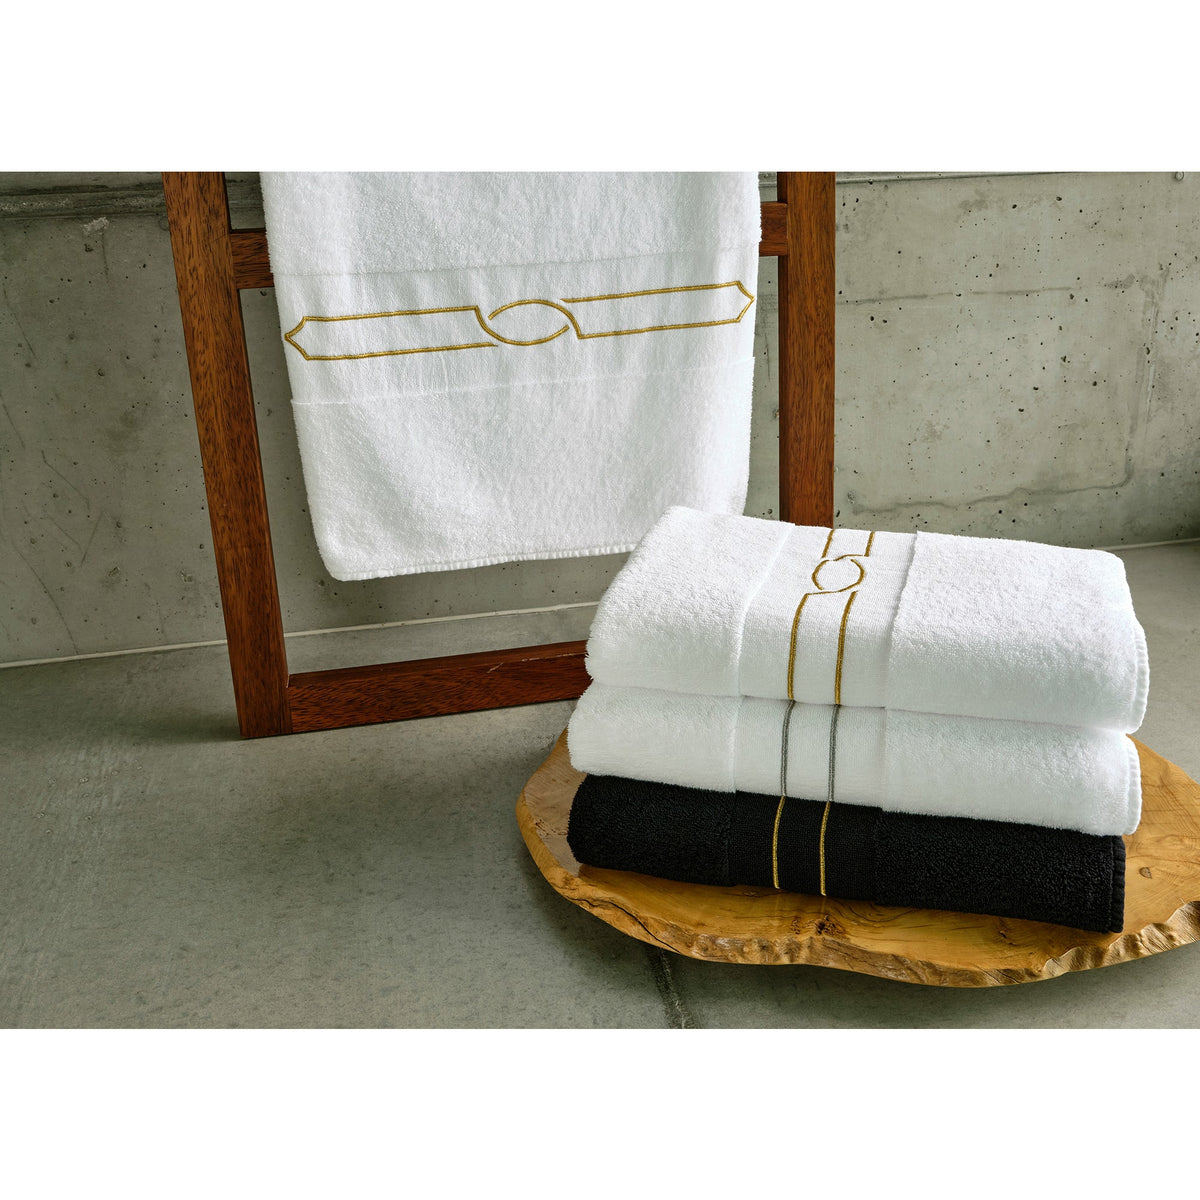 Abyss Cluny Bath Towel Stack Lifestyle (109) Fine Linens